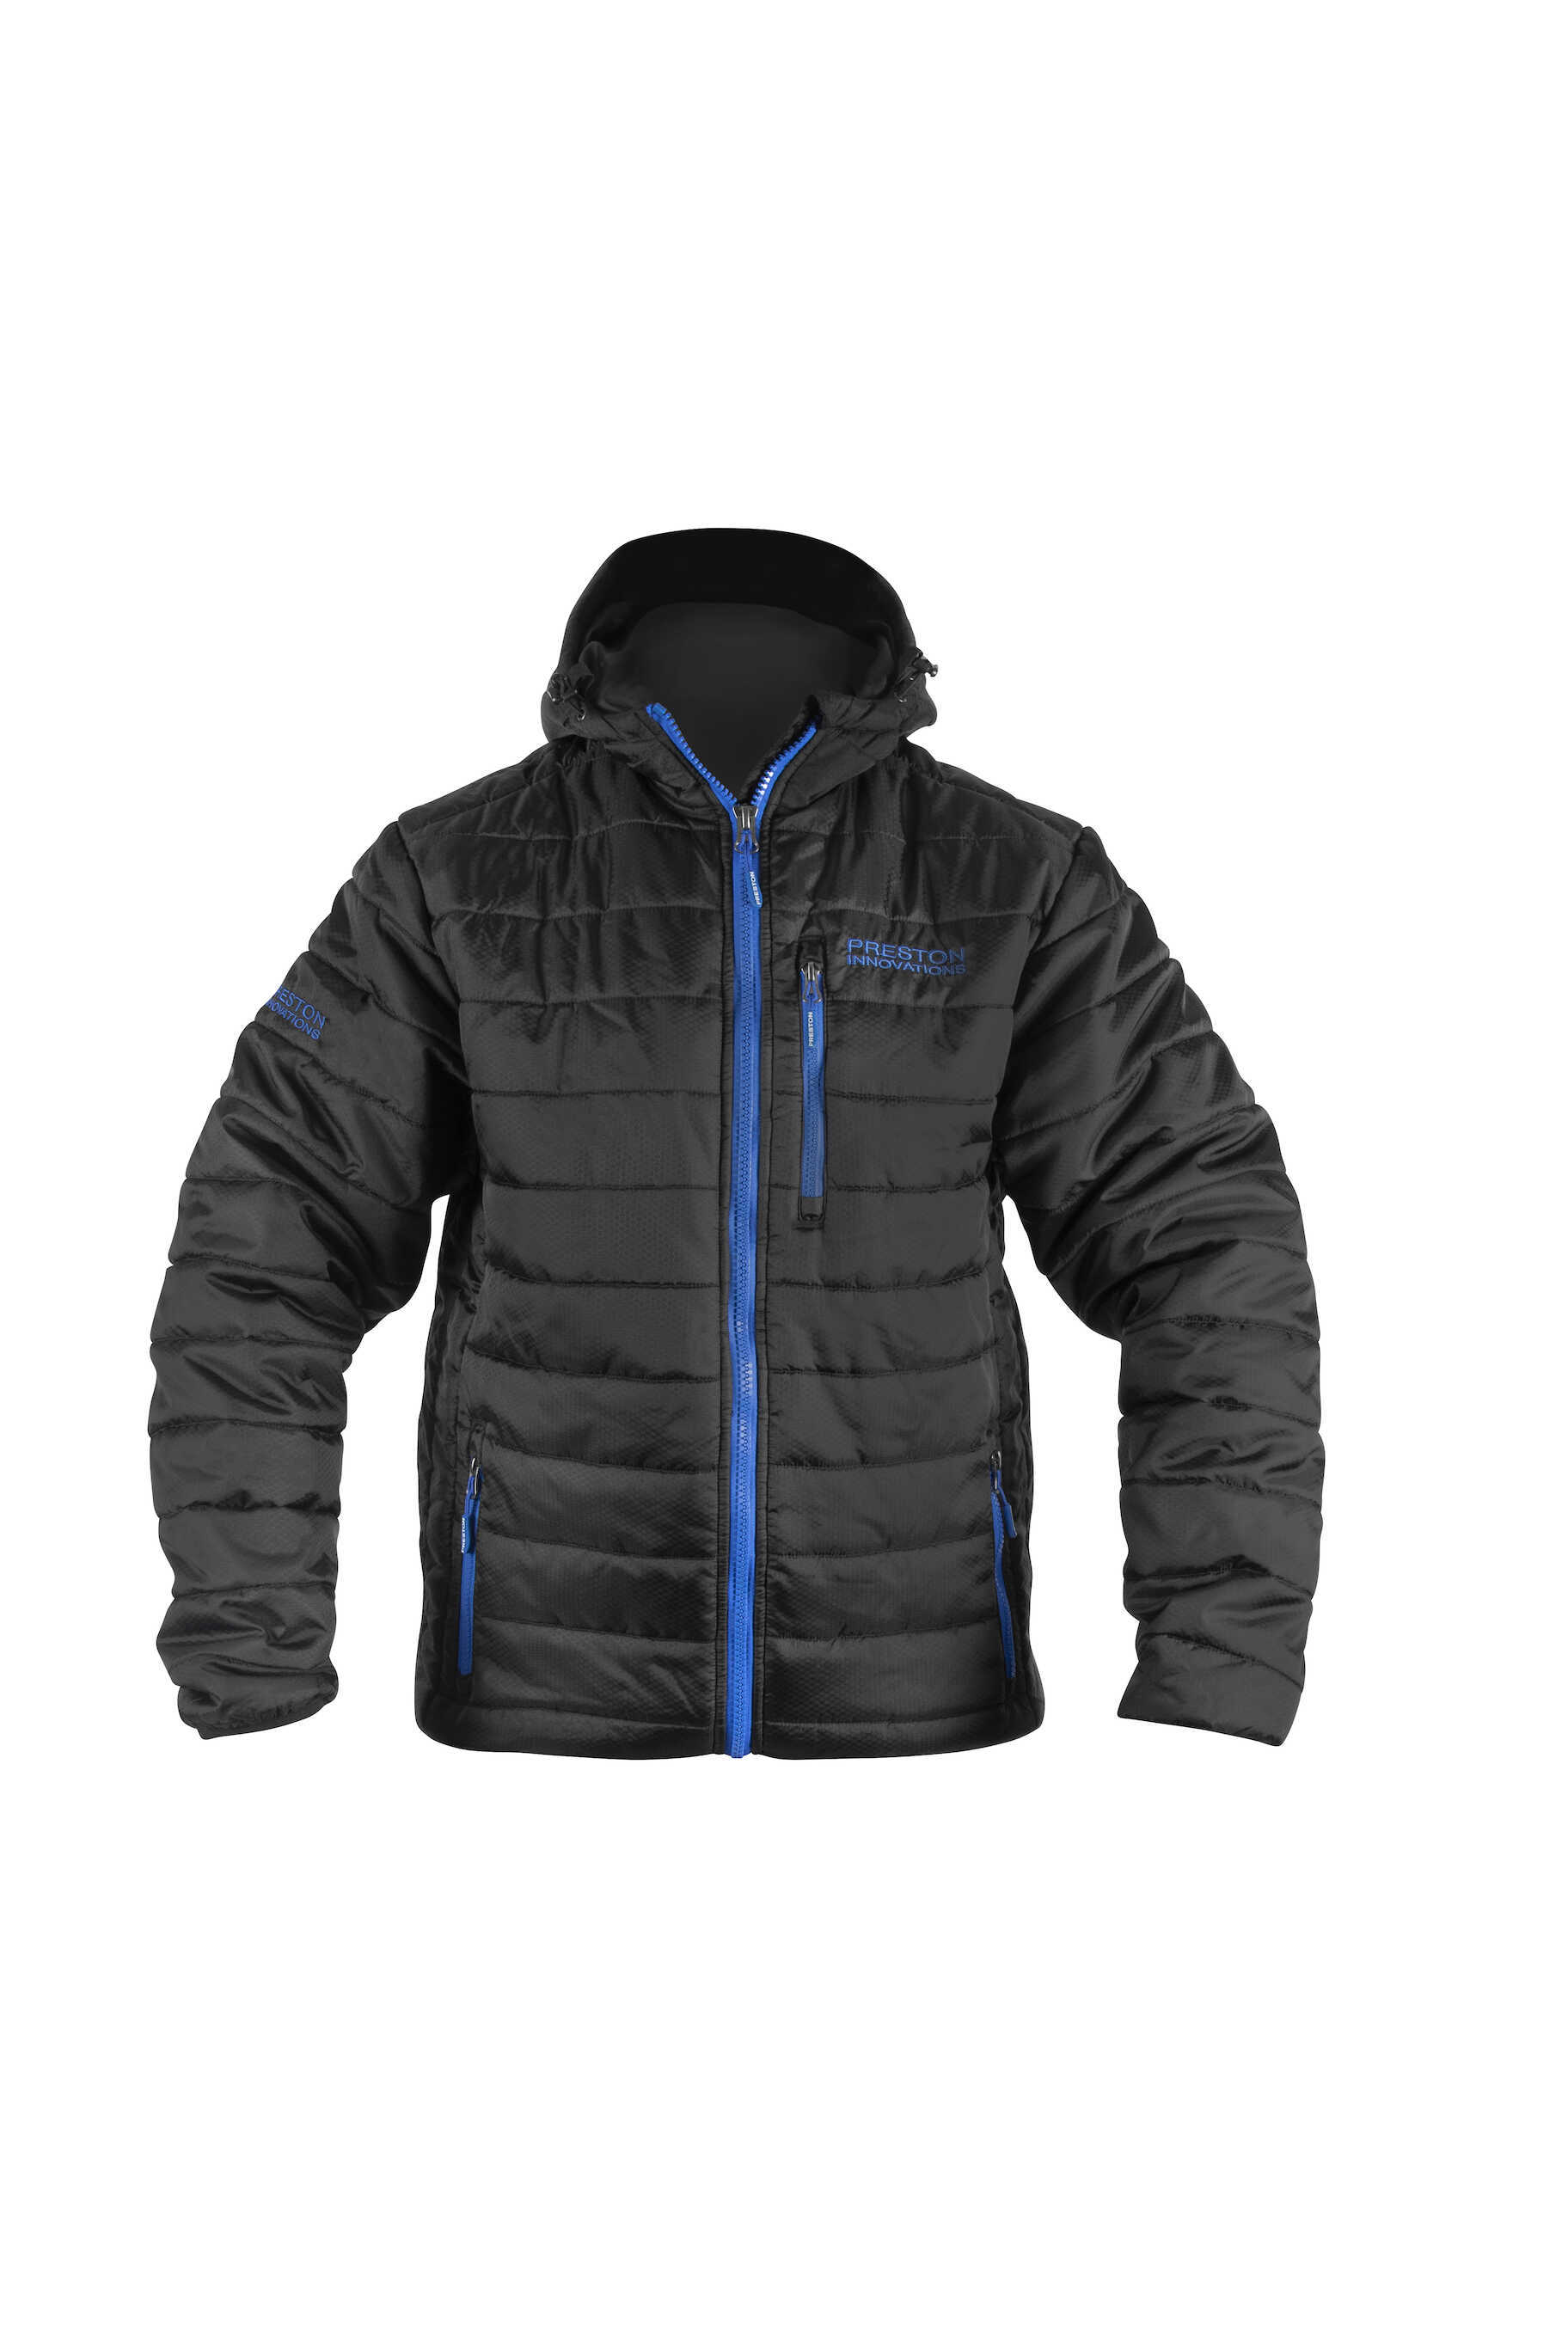 ALL SIZES* Details about   Preston Celcius Puffer Jacket  *FREE 24 HOUR DELIVERY 